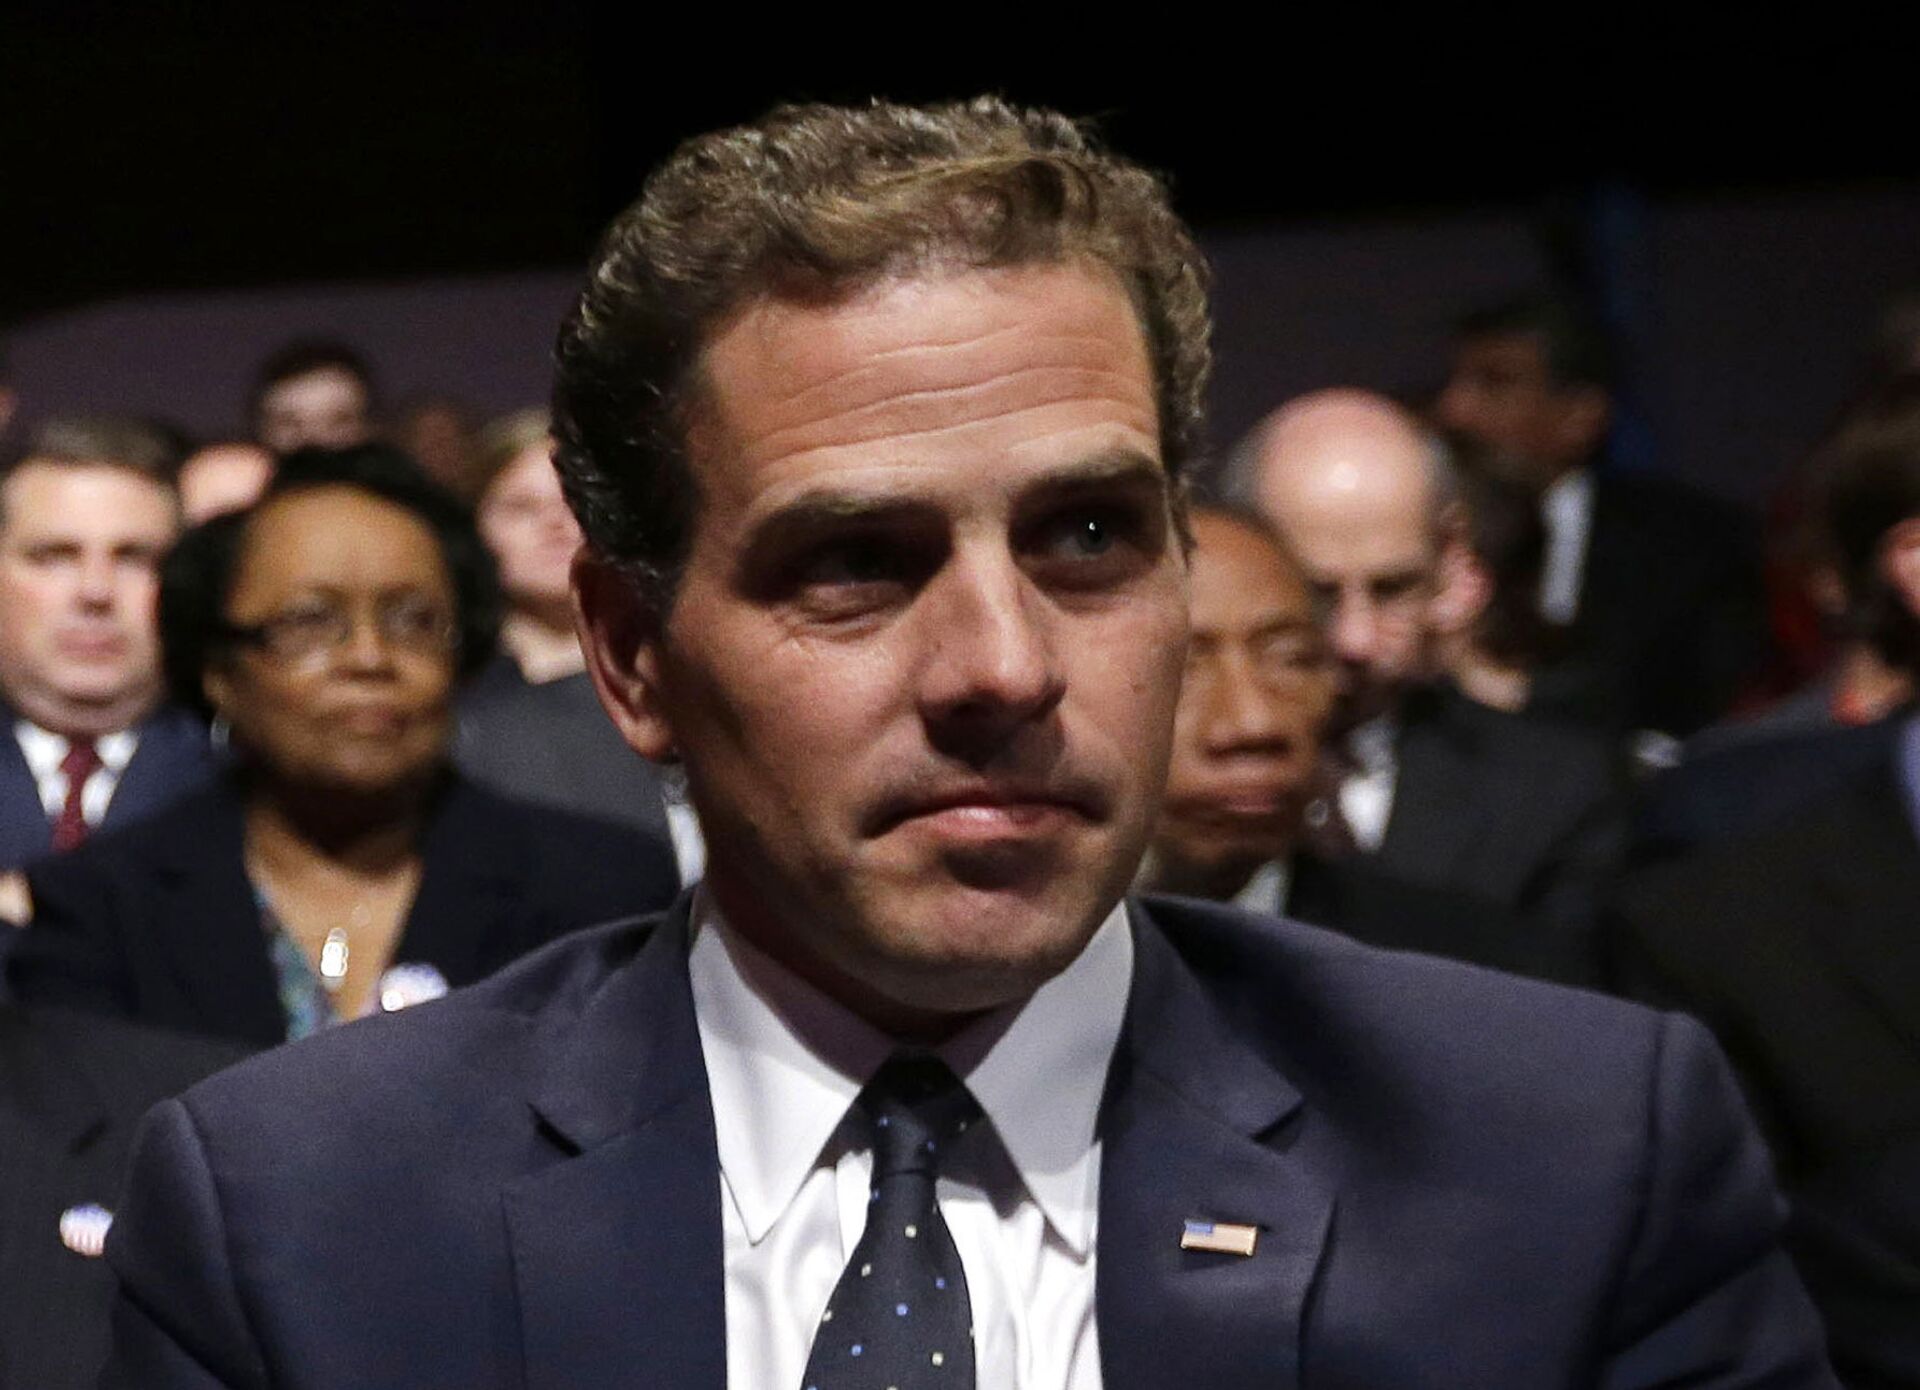 Trump's Victory Would Have Been 'Threat to My Freedom', Hunter Biden Claims in New Book - Sputnik International, 1920, 07.04.2021